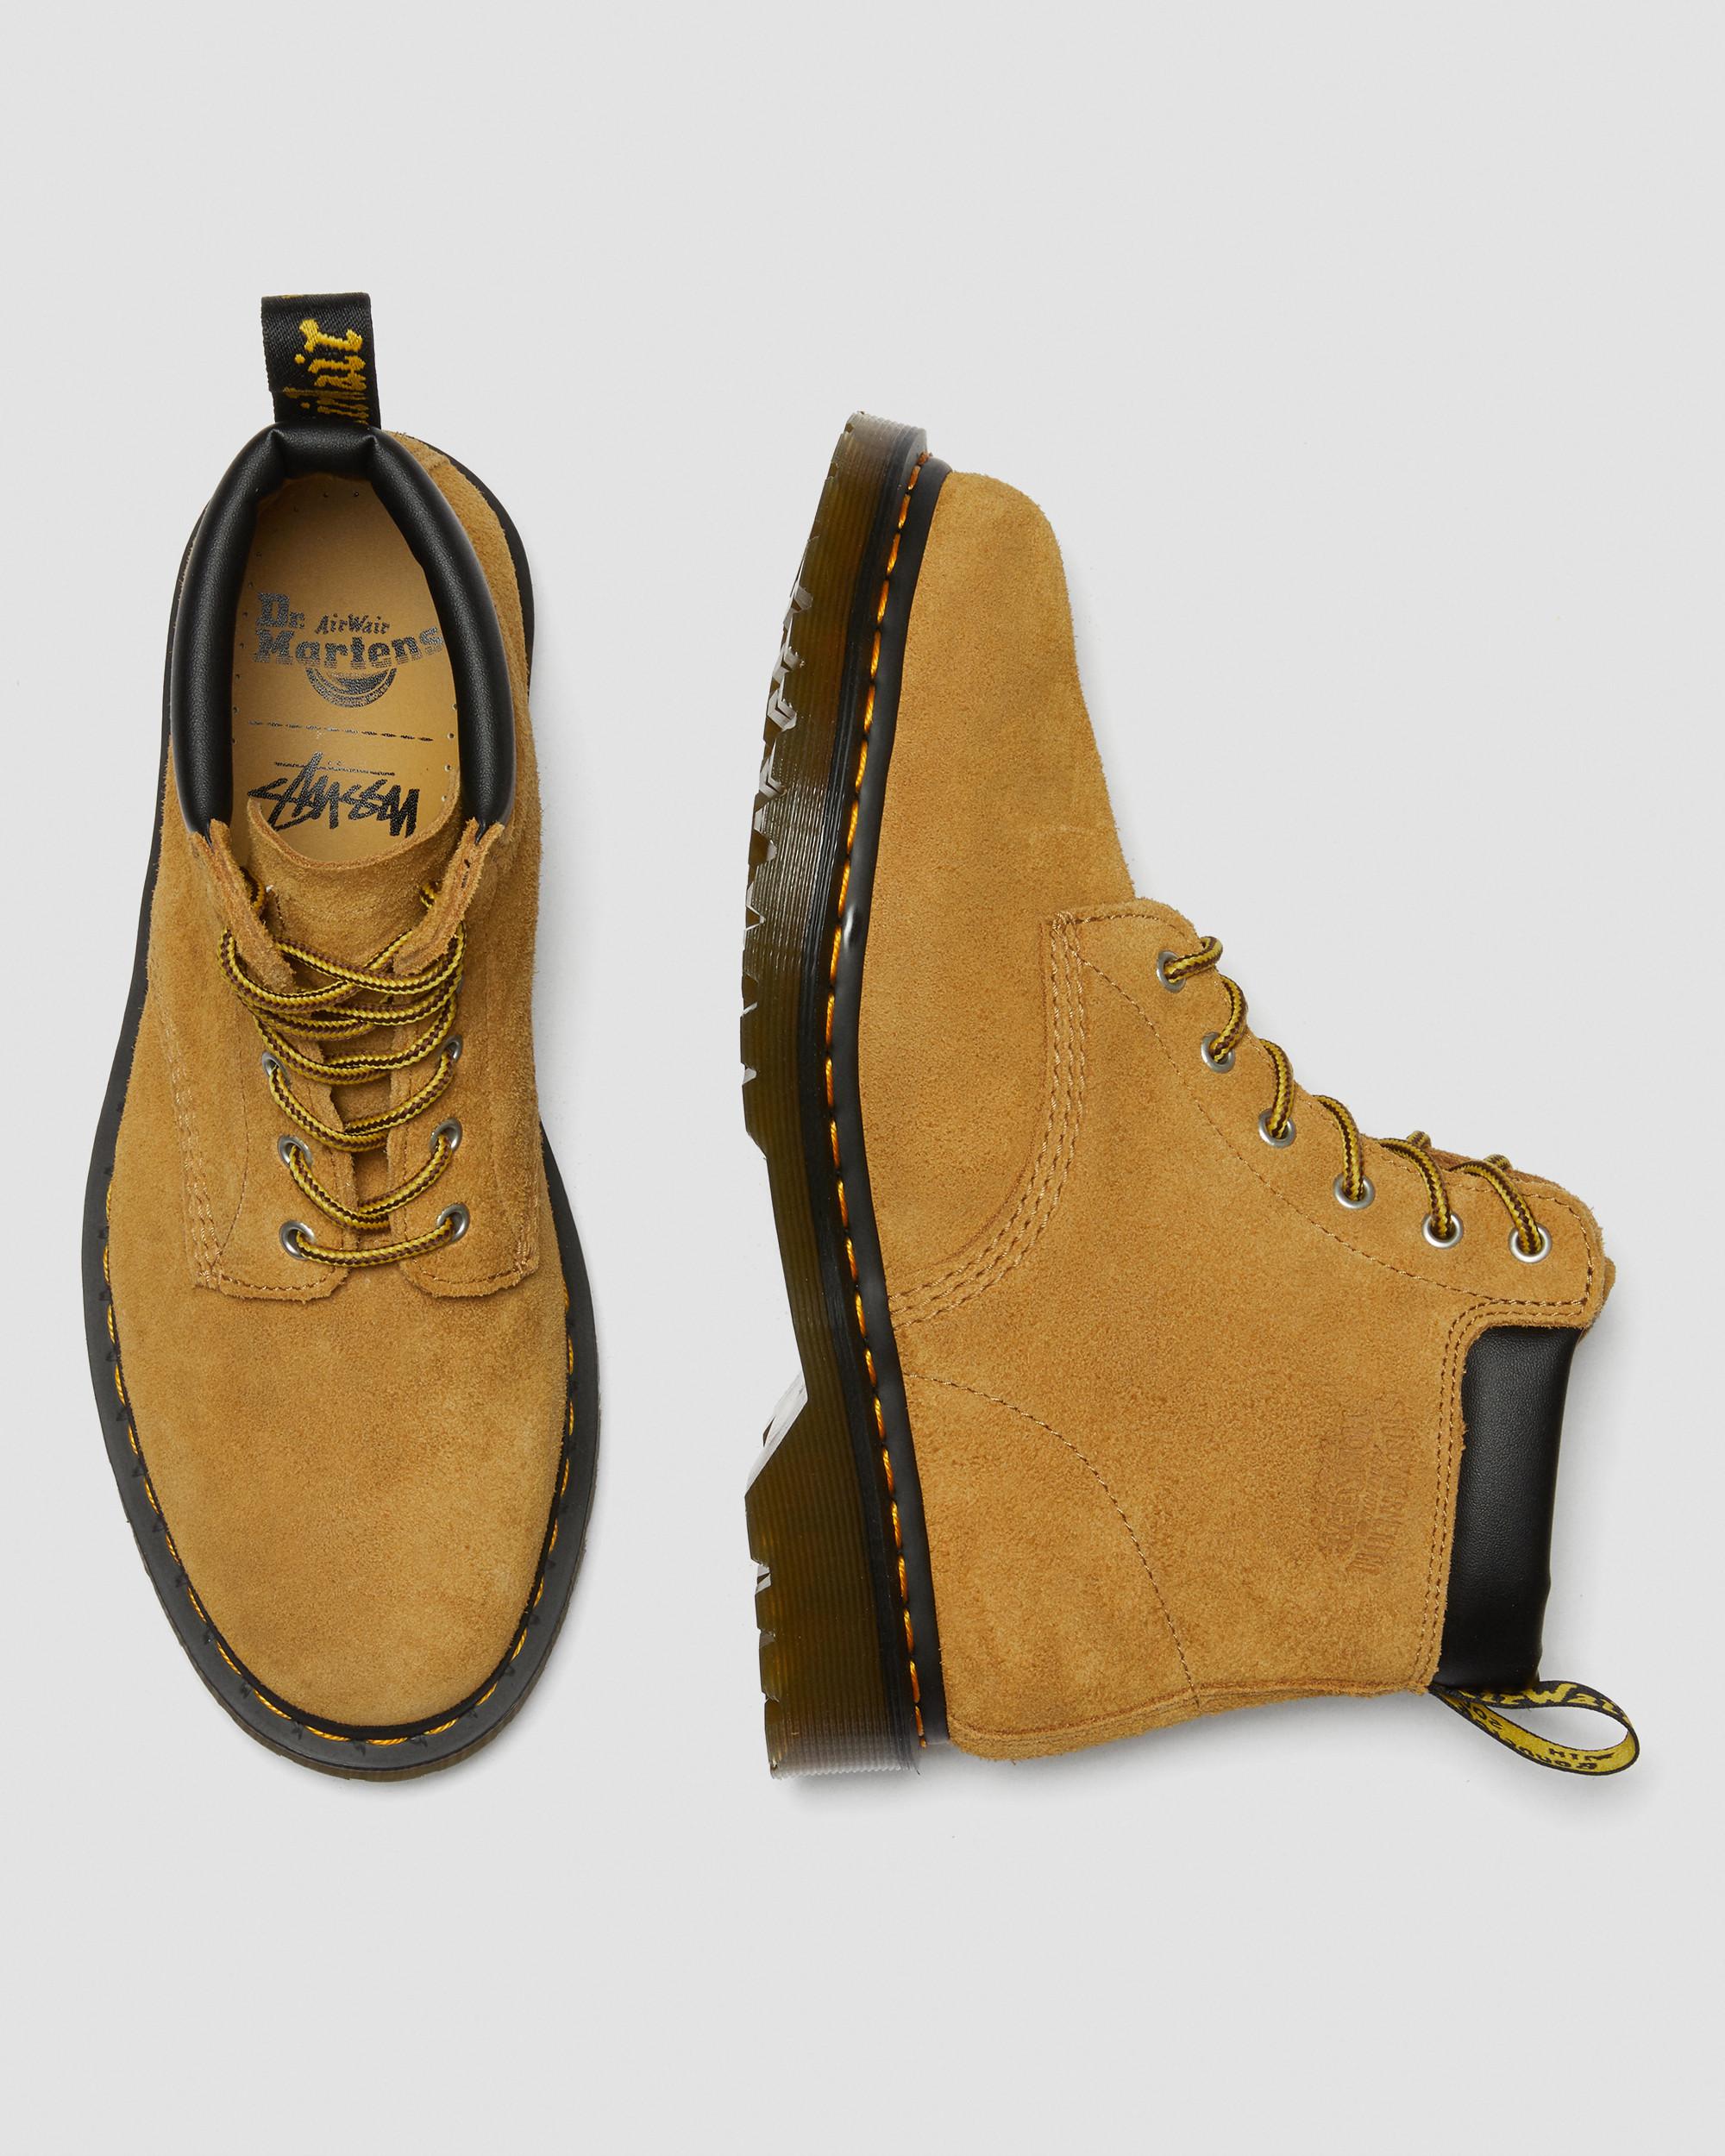 939 Stüssy Suede Ankle Boots | Dr. Martens